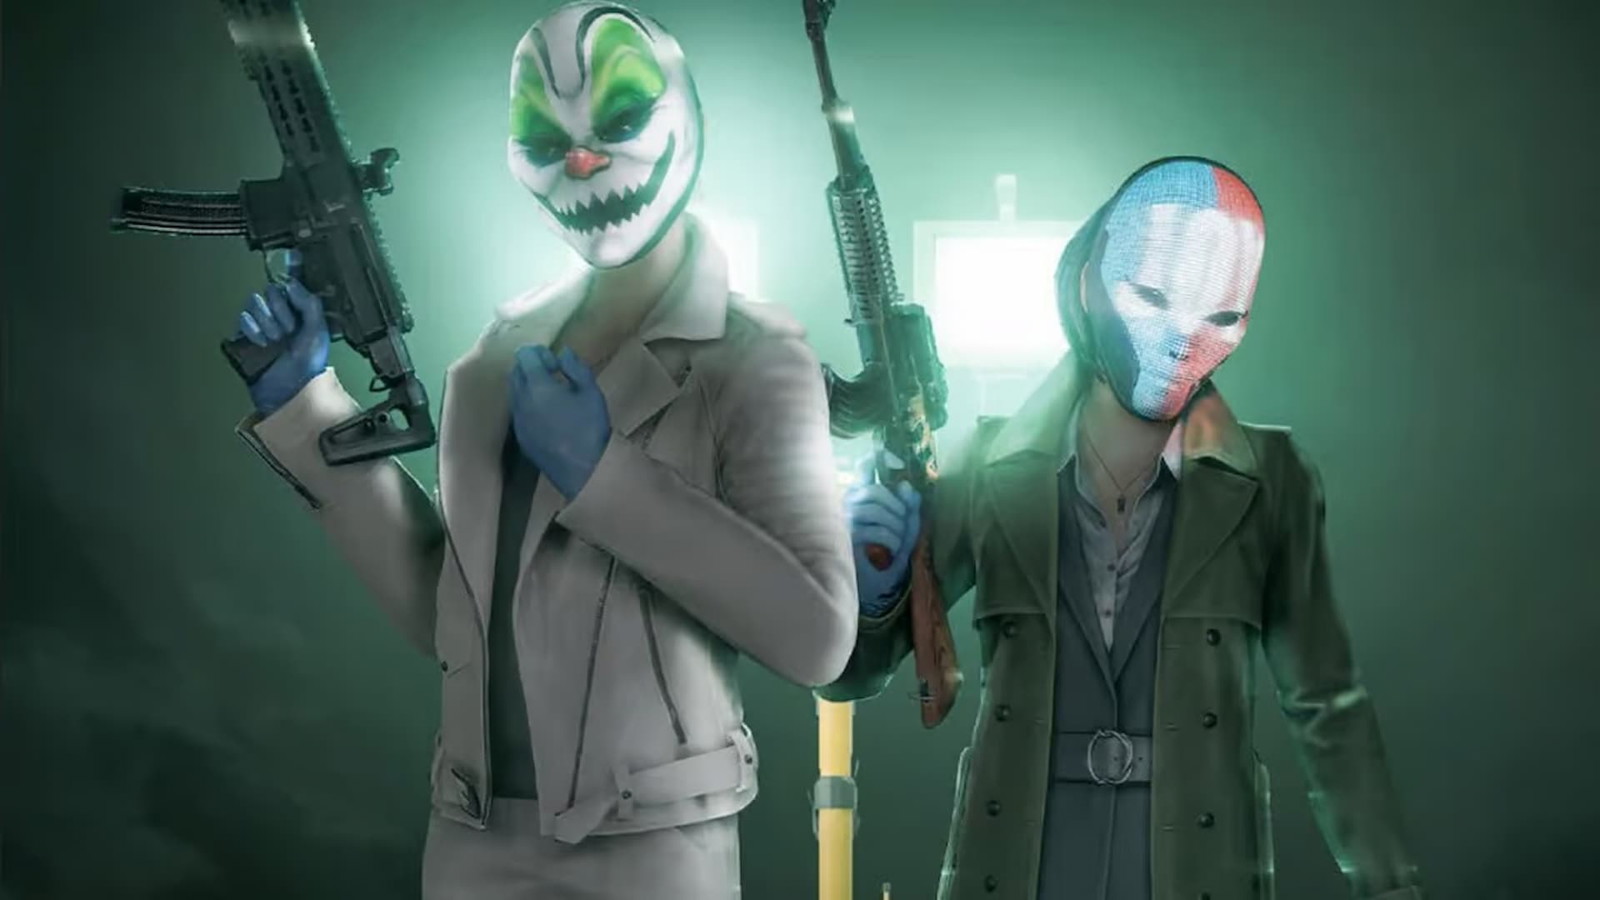 Payday 3 is still seeing server crashes and matchmaking issues